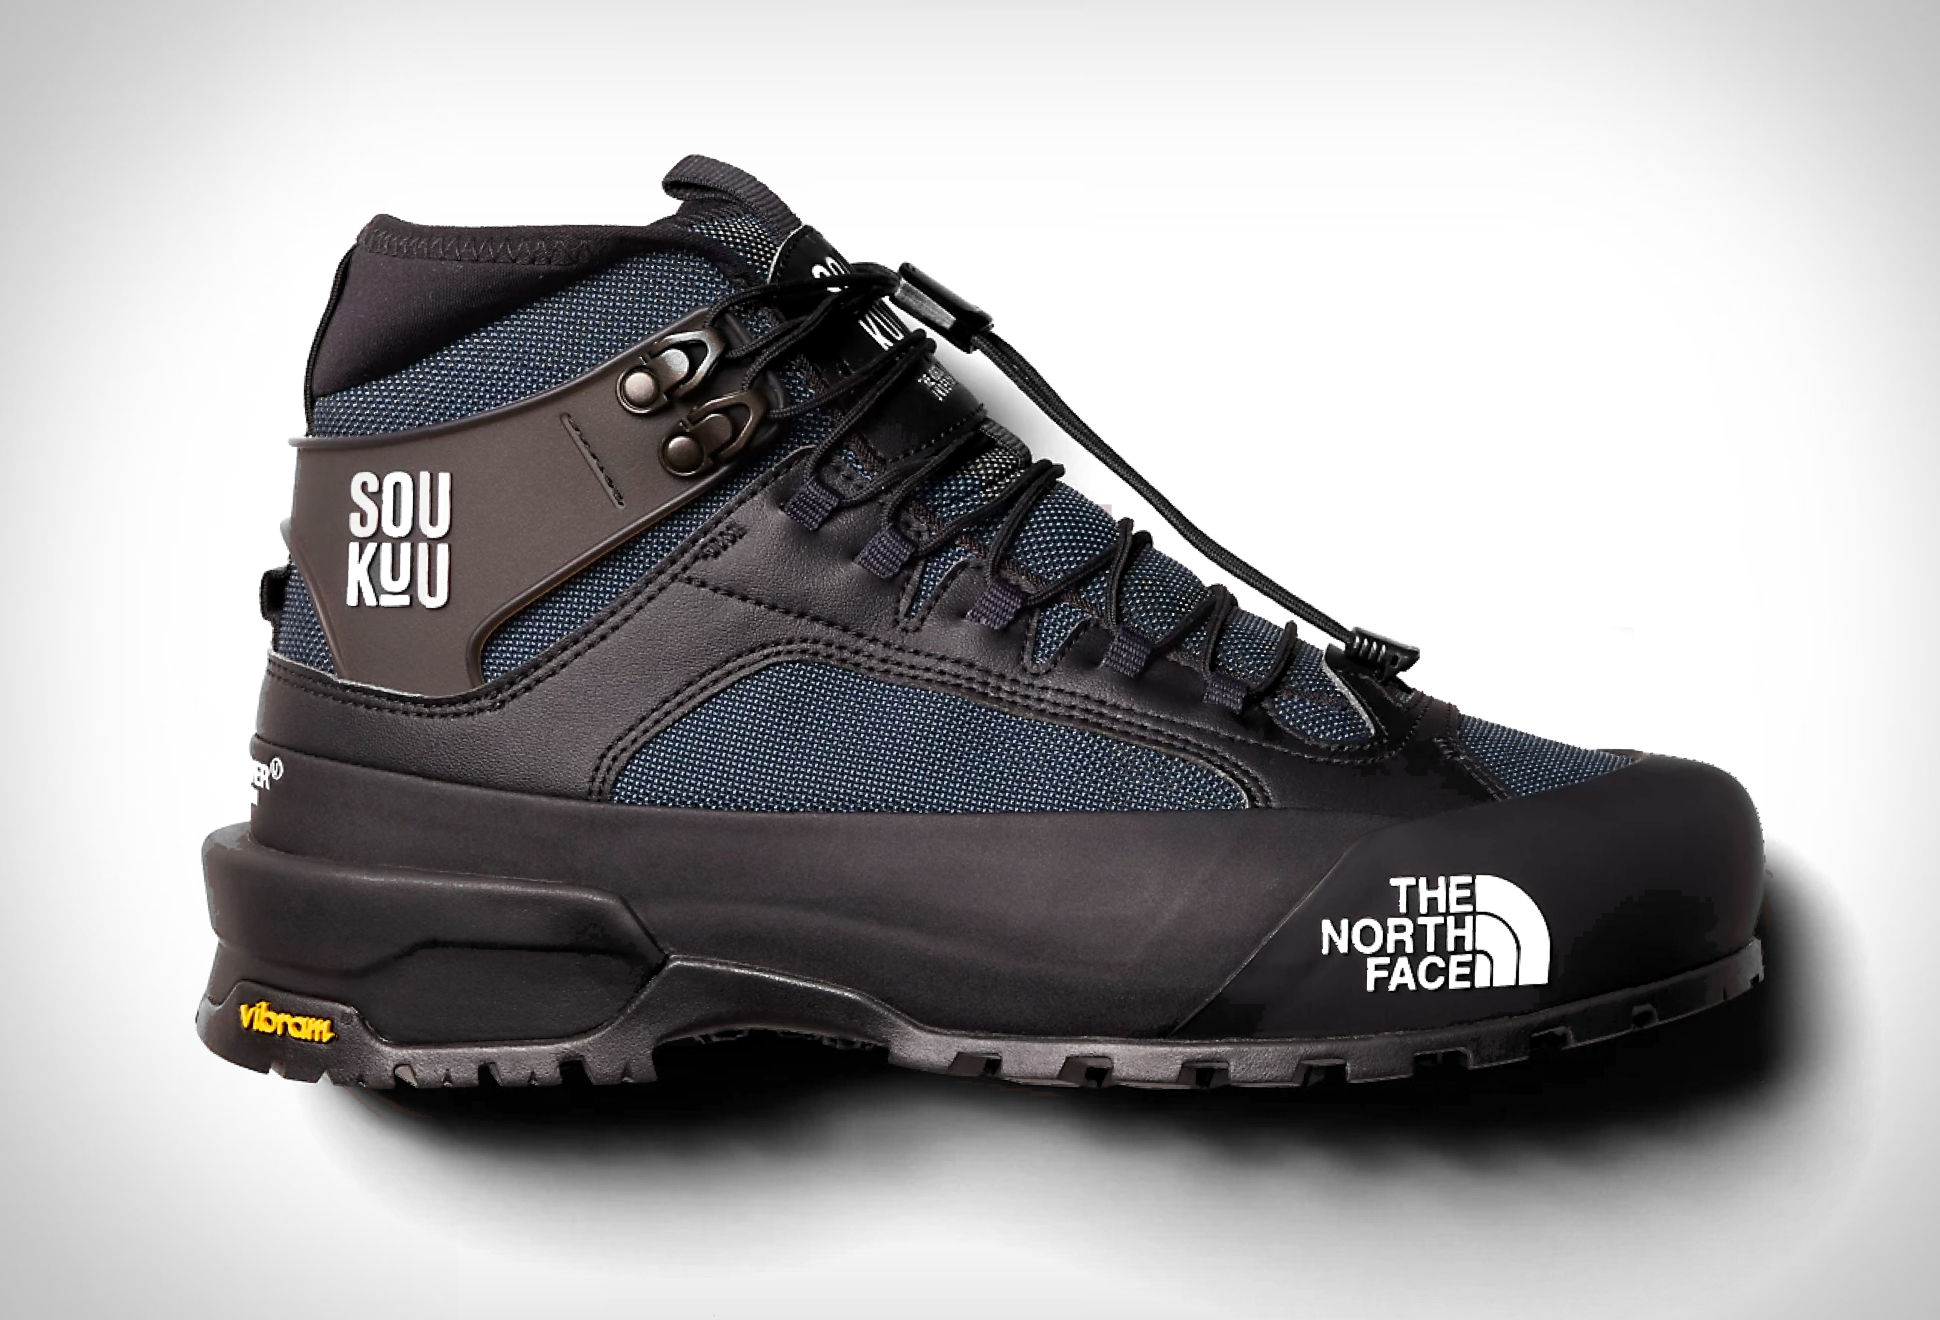 The North Face X Undercover SOUKUU Glenclyffe Boots | Image